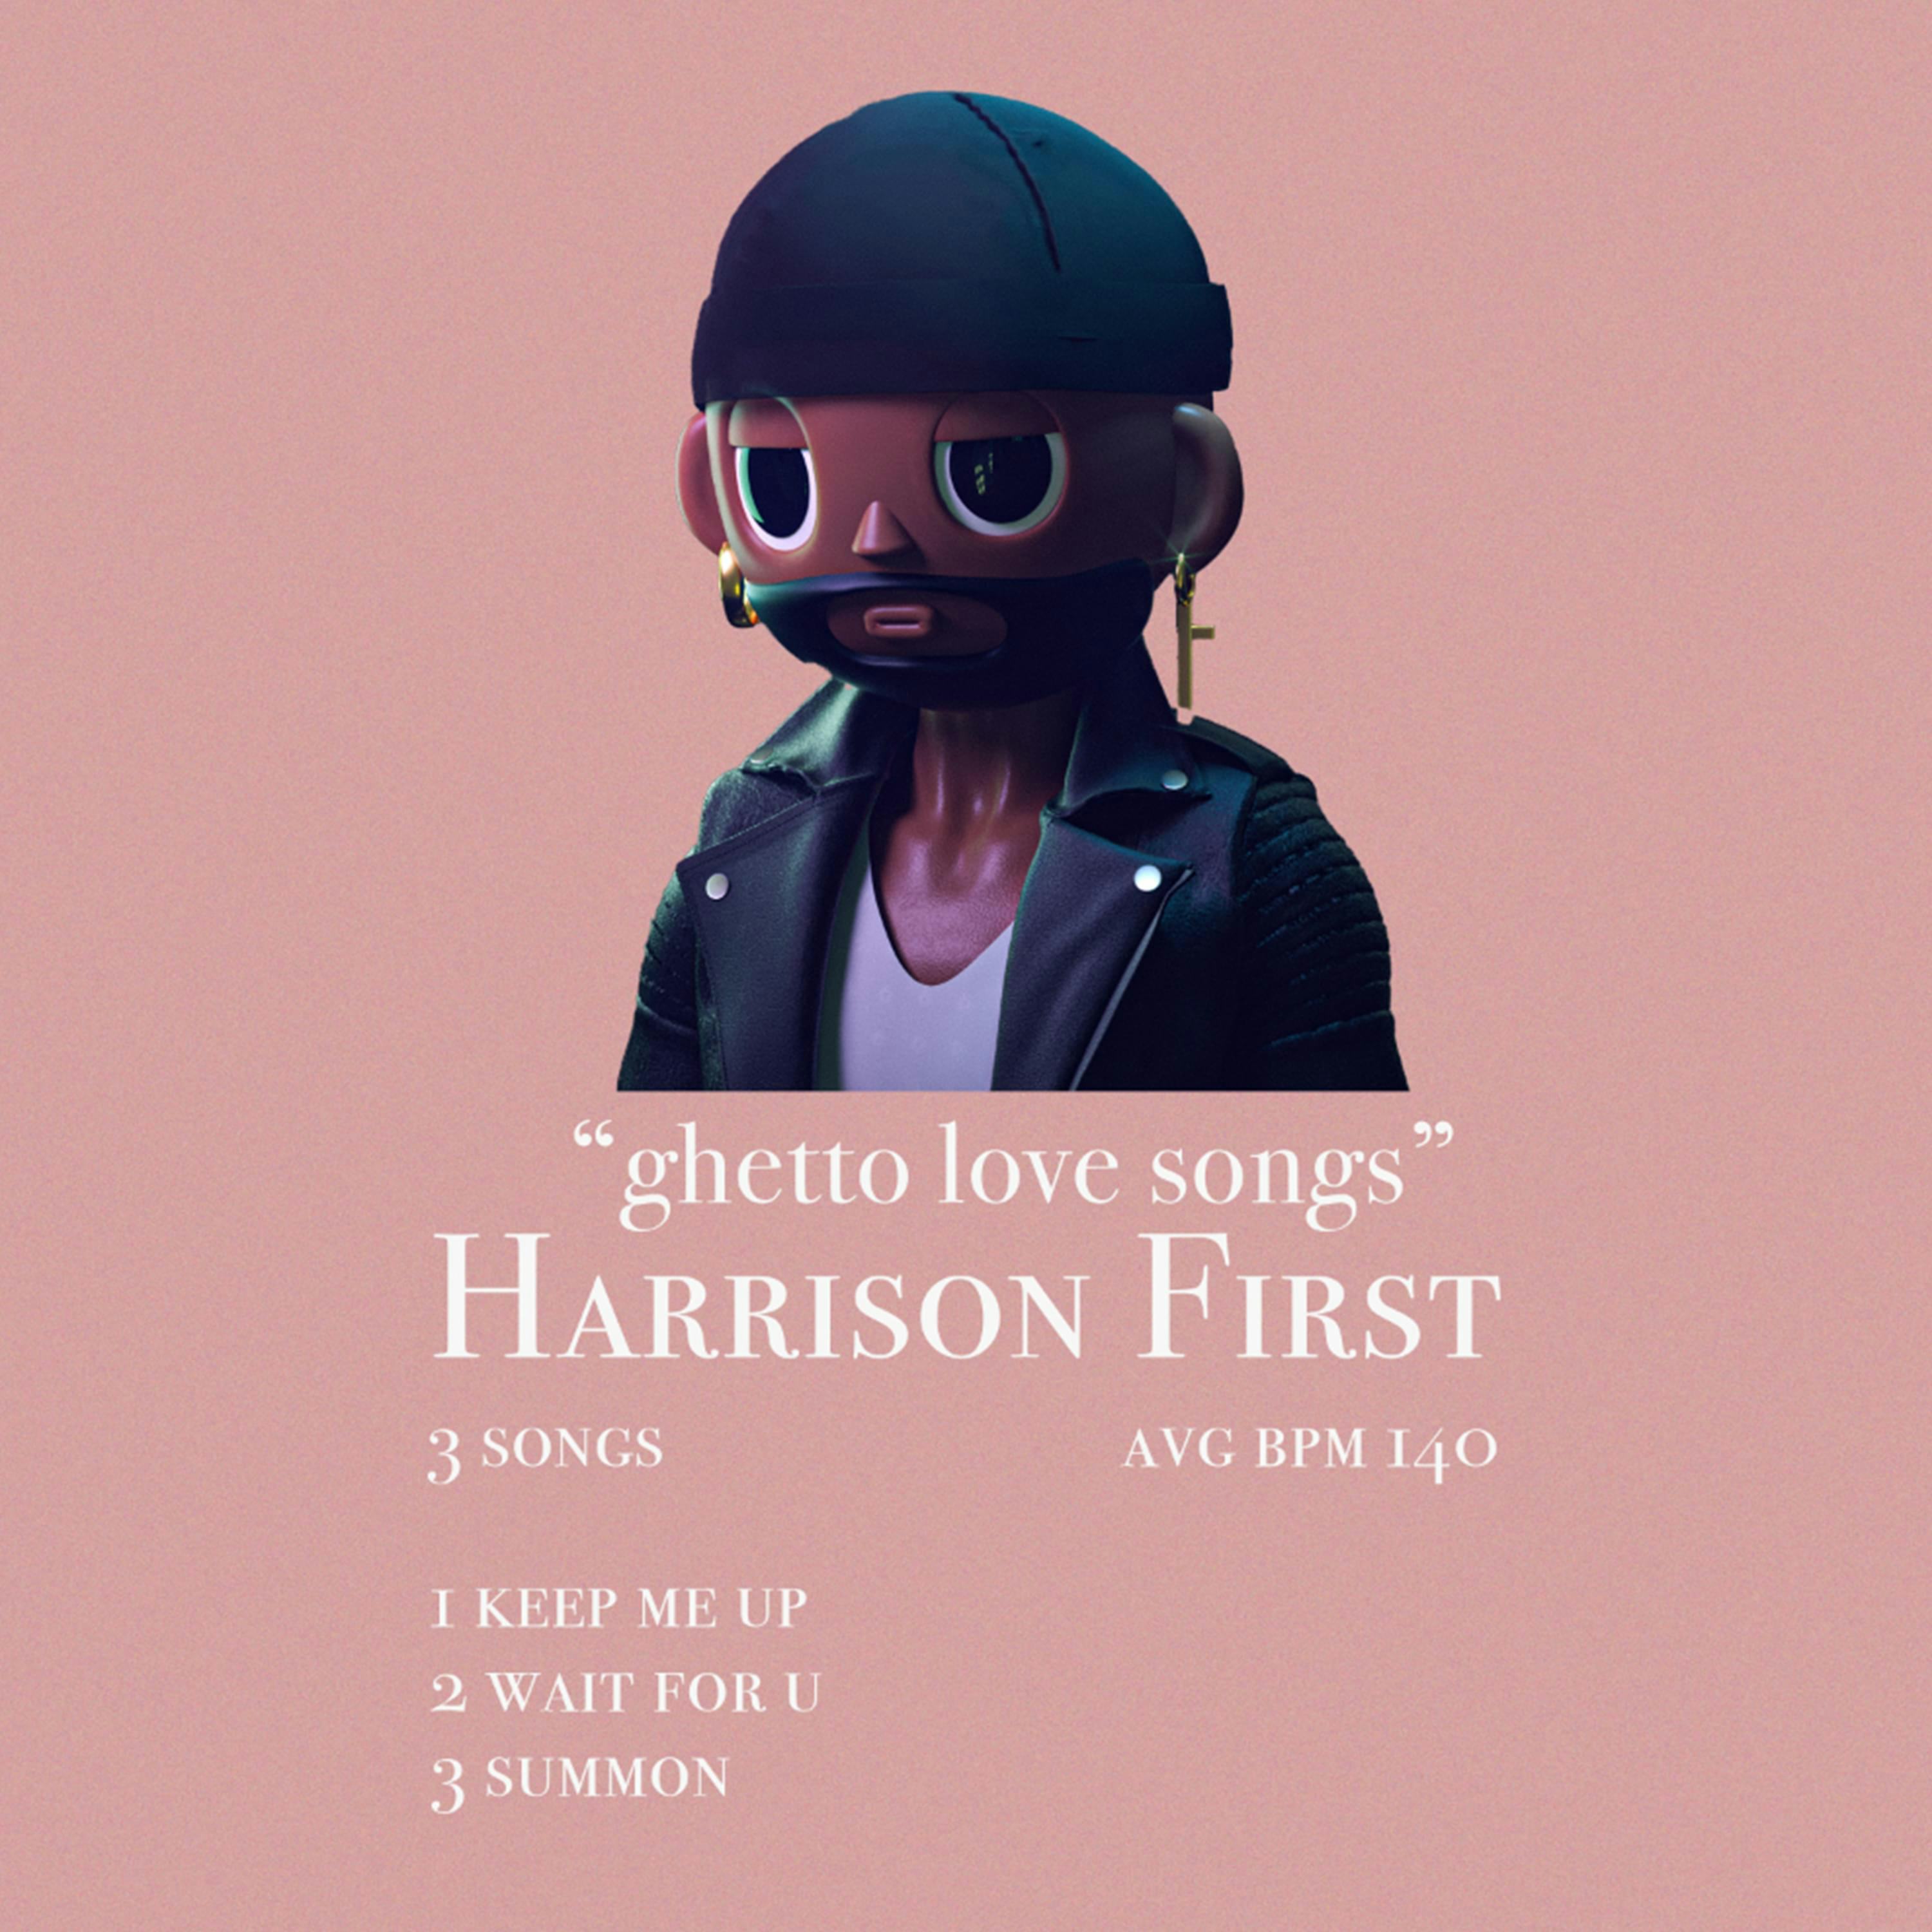 Cover art for "ghetto love songs" by Harrison $First by Harrison First